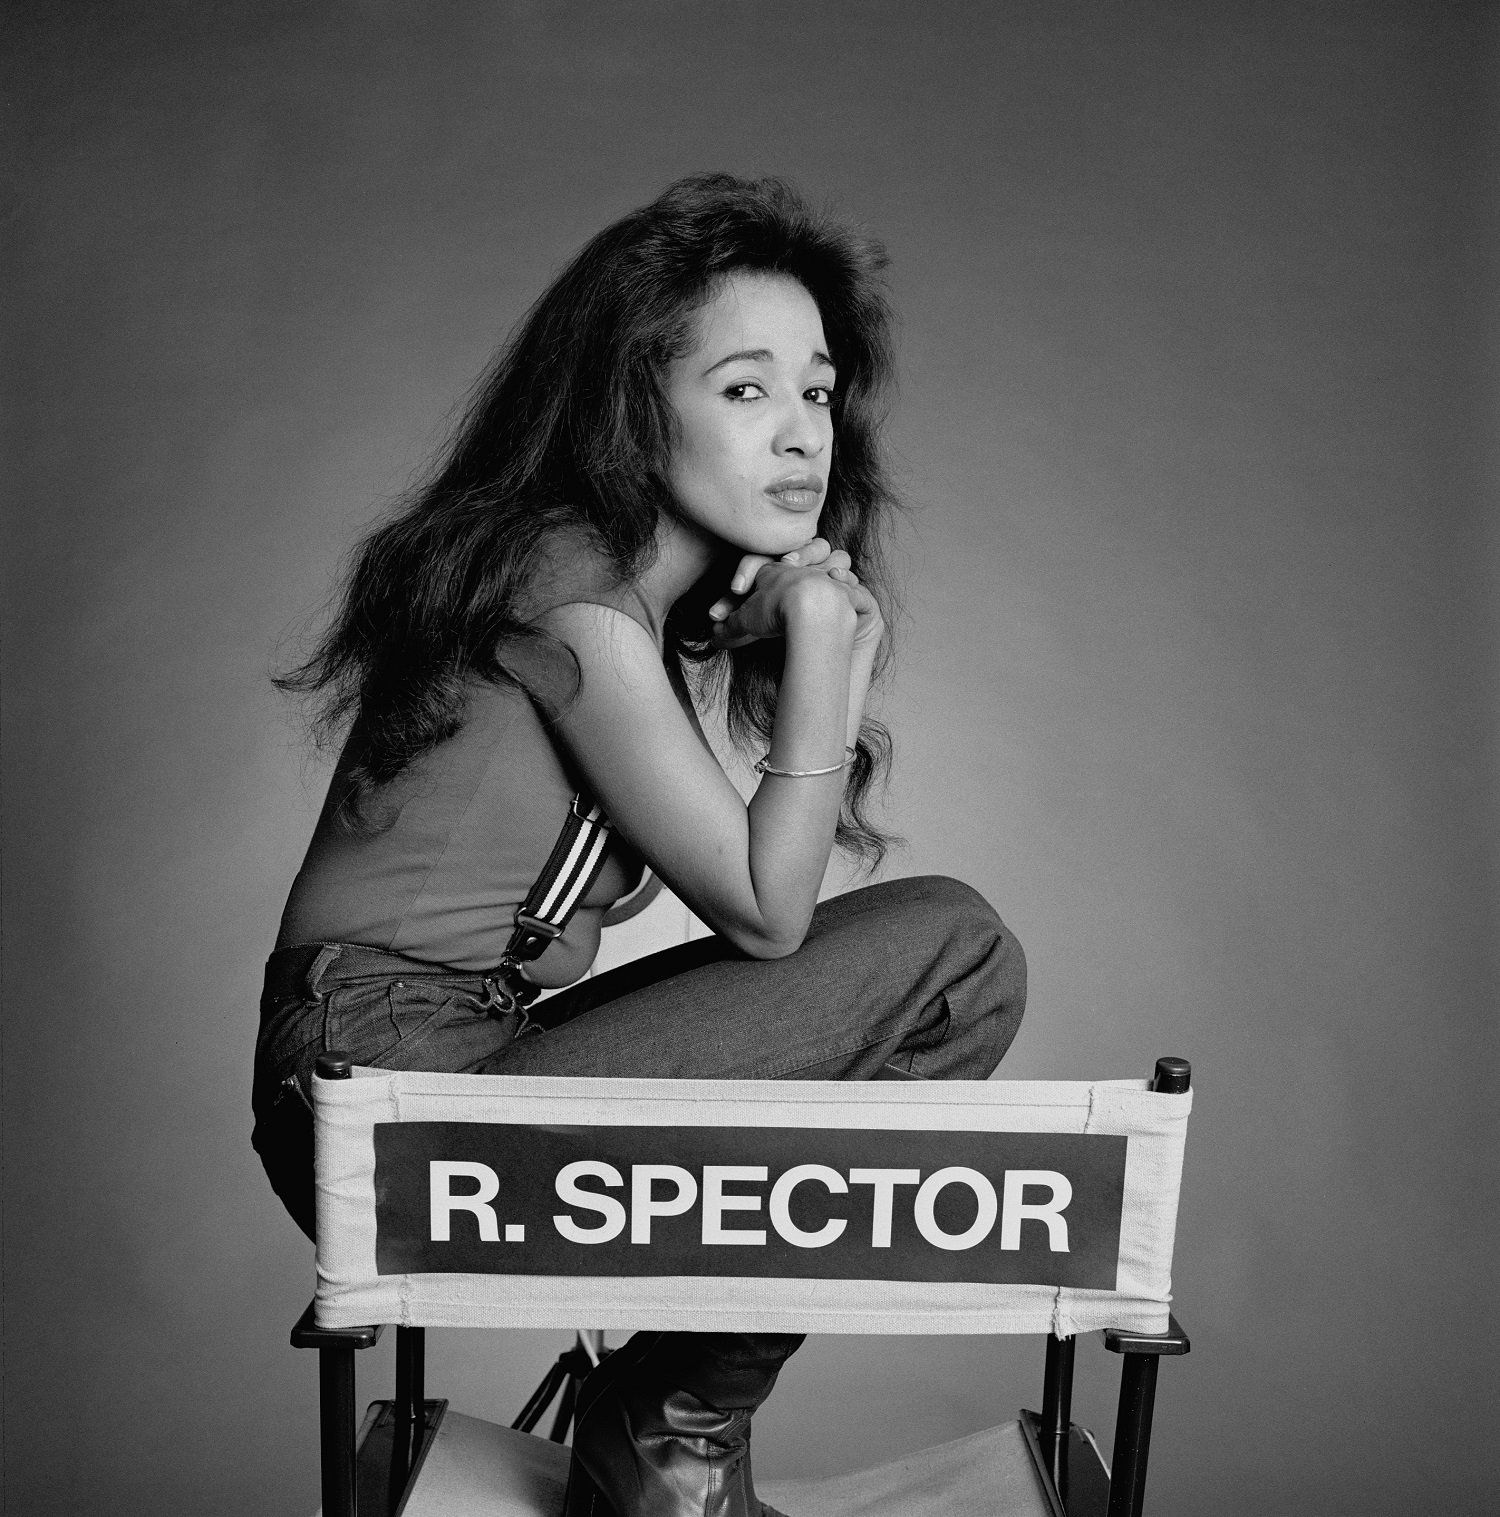 Ronnie Spector in an undated black and white photo